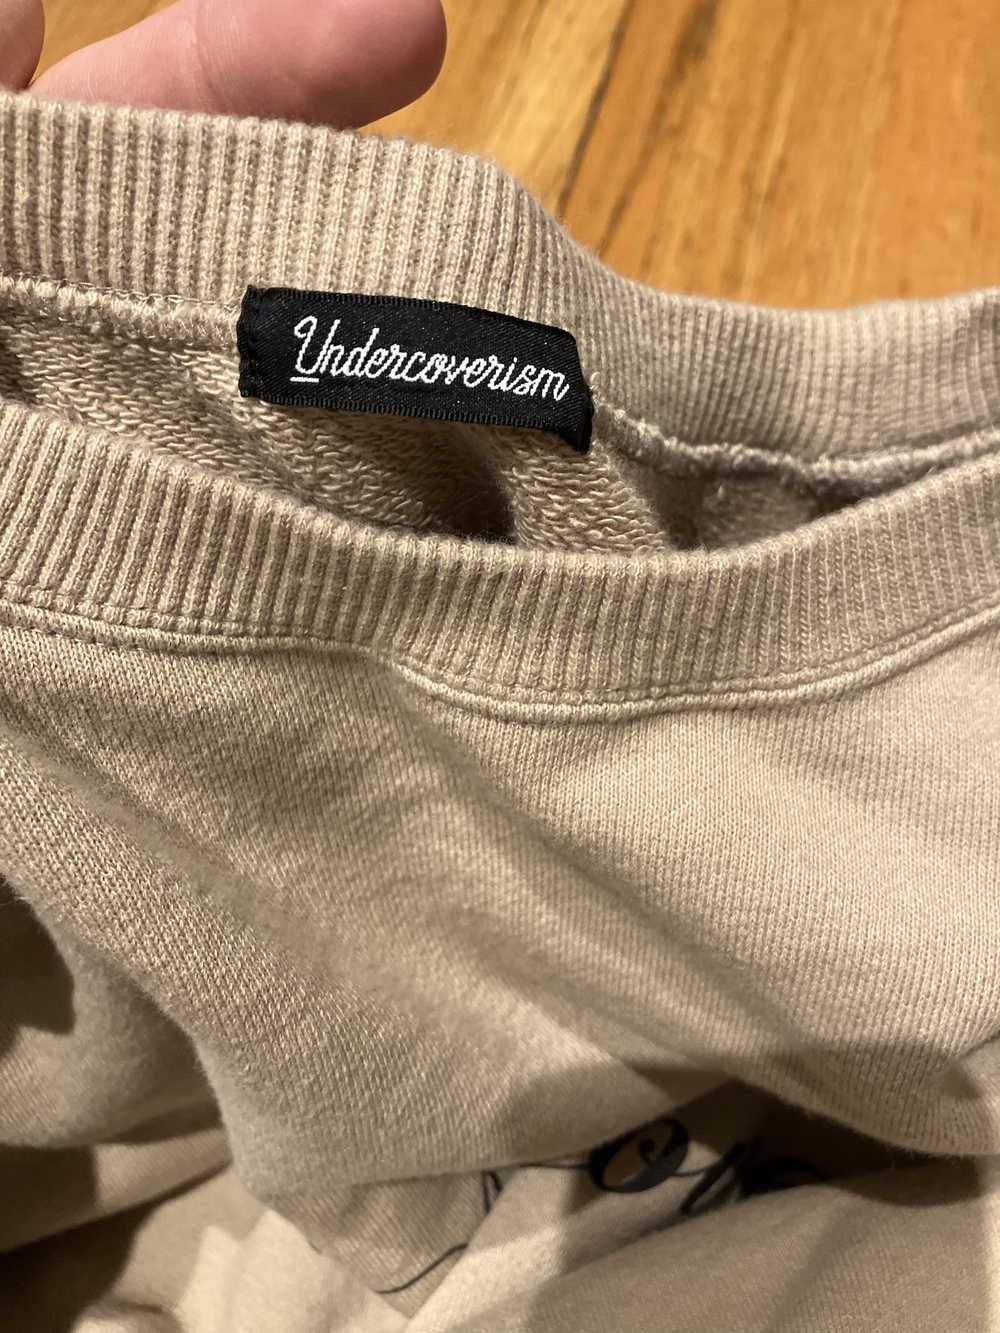 Undercover Undercoverism tan sweater - image 2